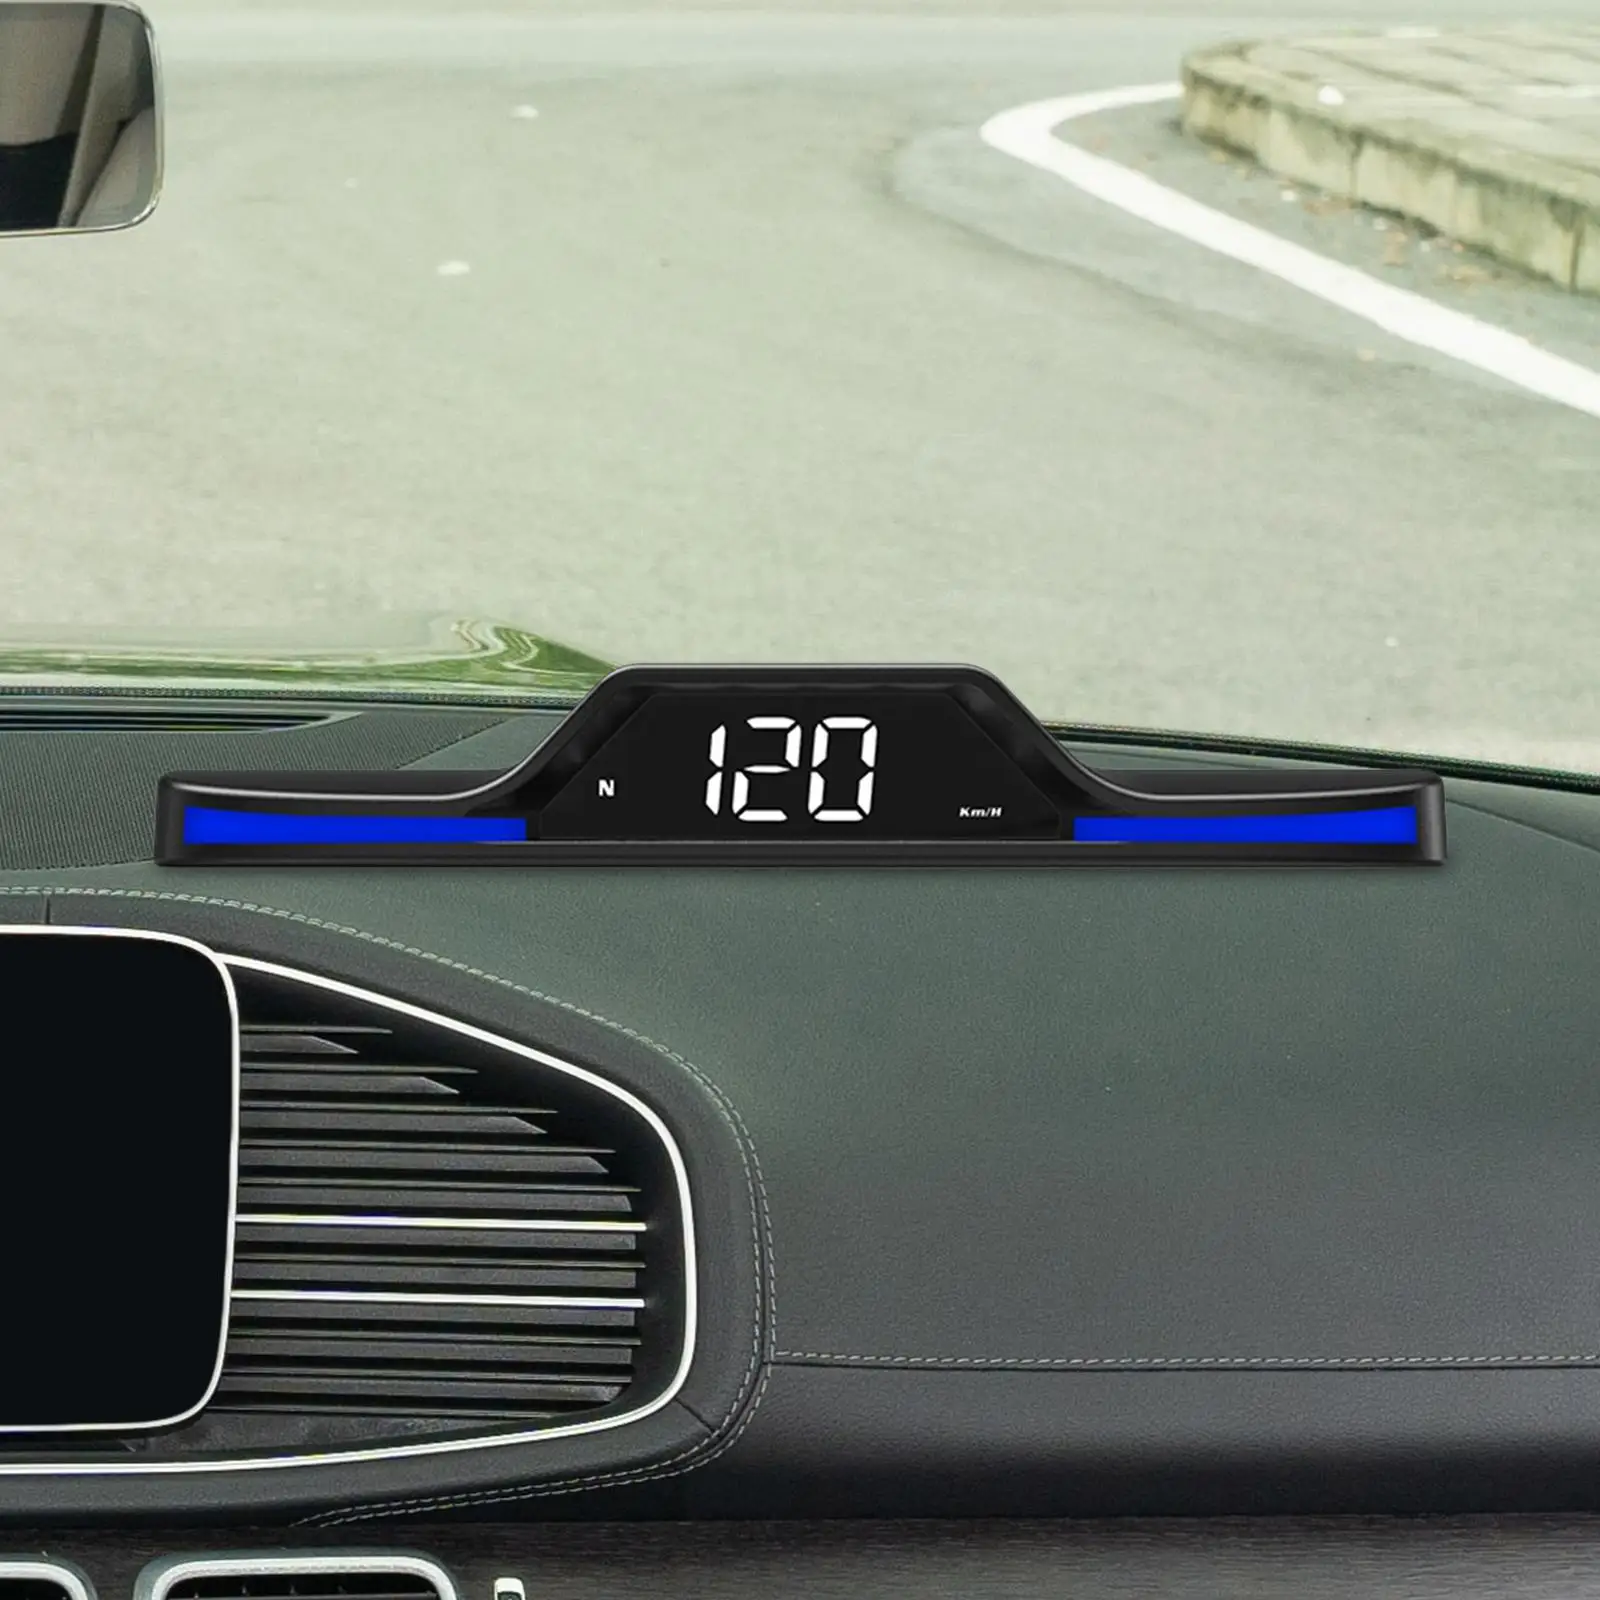 G15 LED Display Universal Car Head up Display for Vehicles All Car Cars